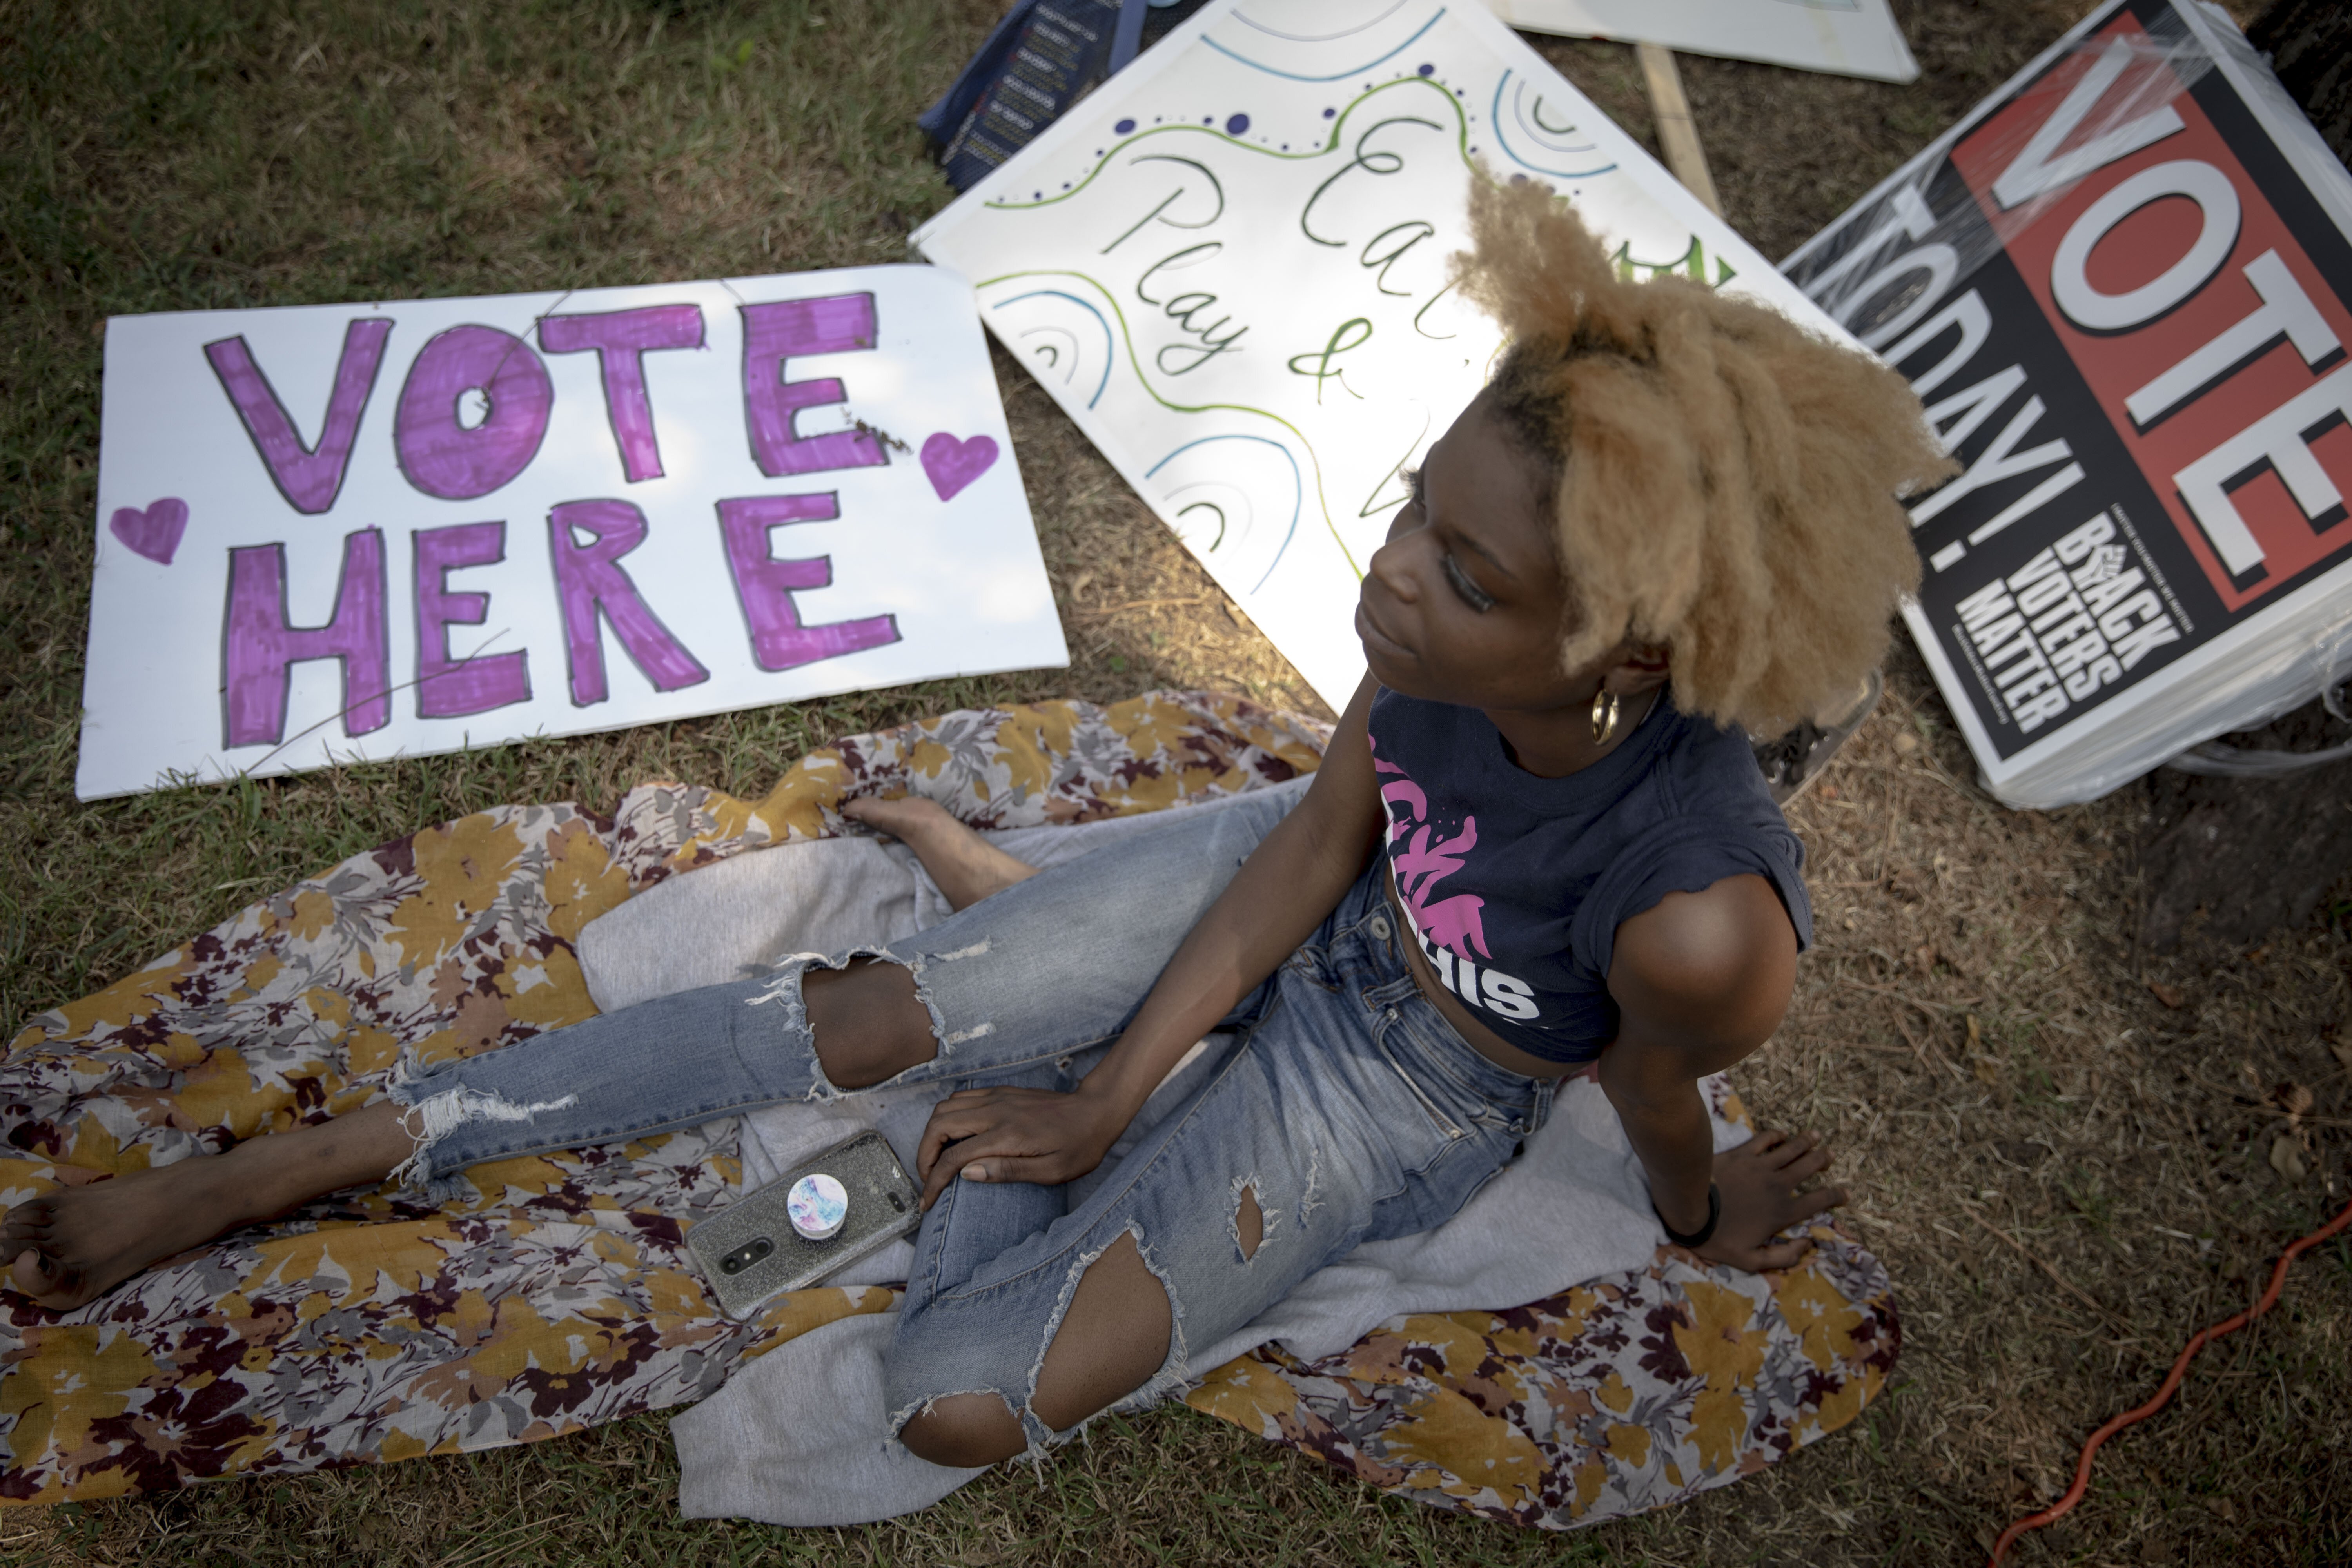 Alandria Ivory, a campaign worker for Memphis for All, takes a break during an early voting event at Glenview Community Center. (Andrea Morales)